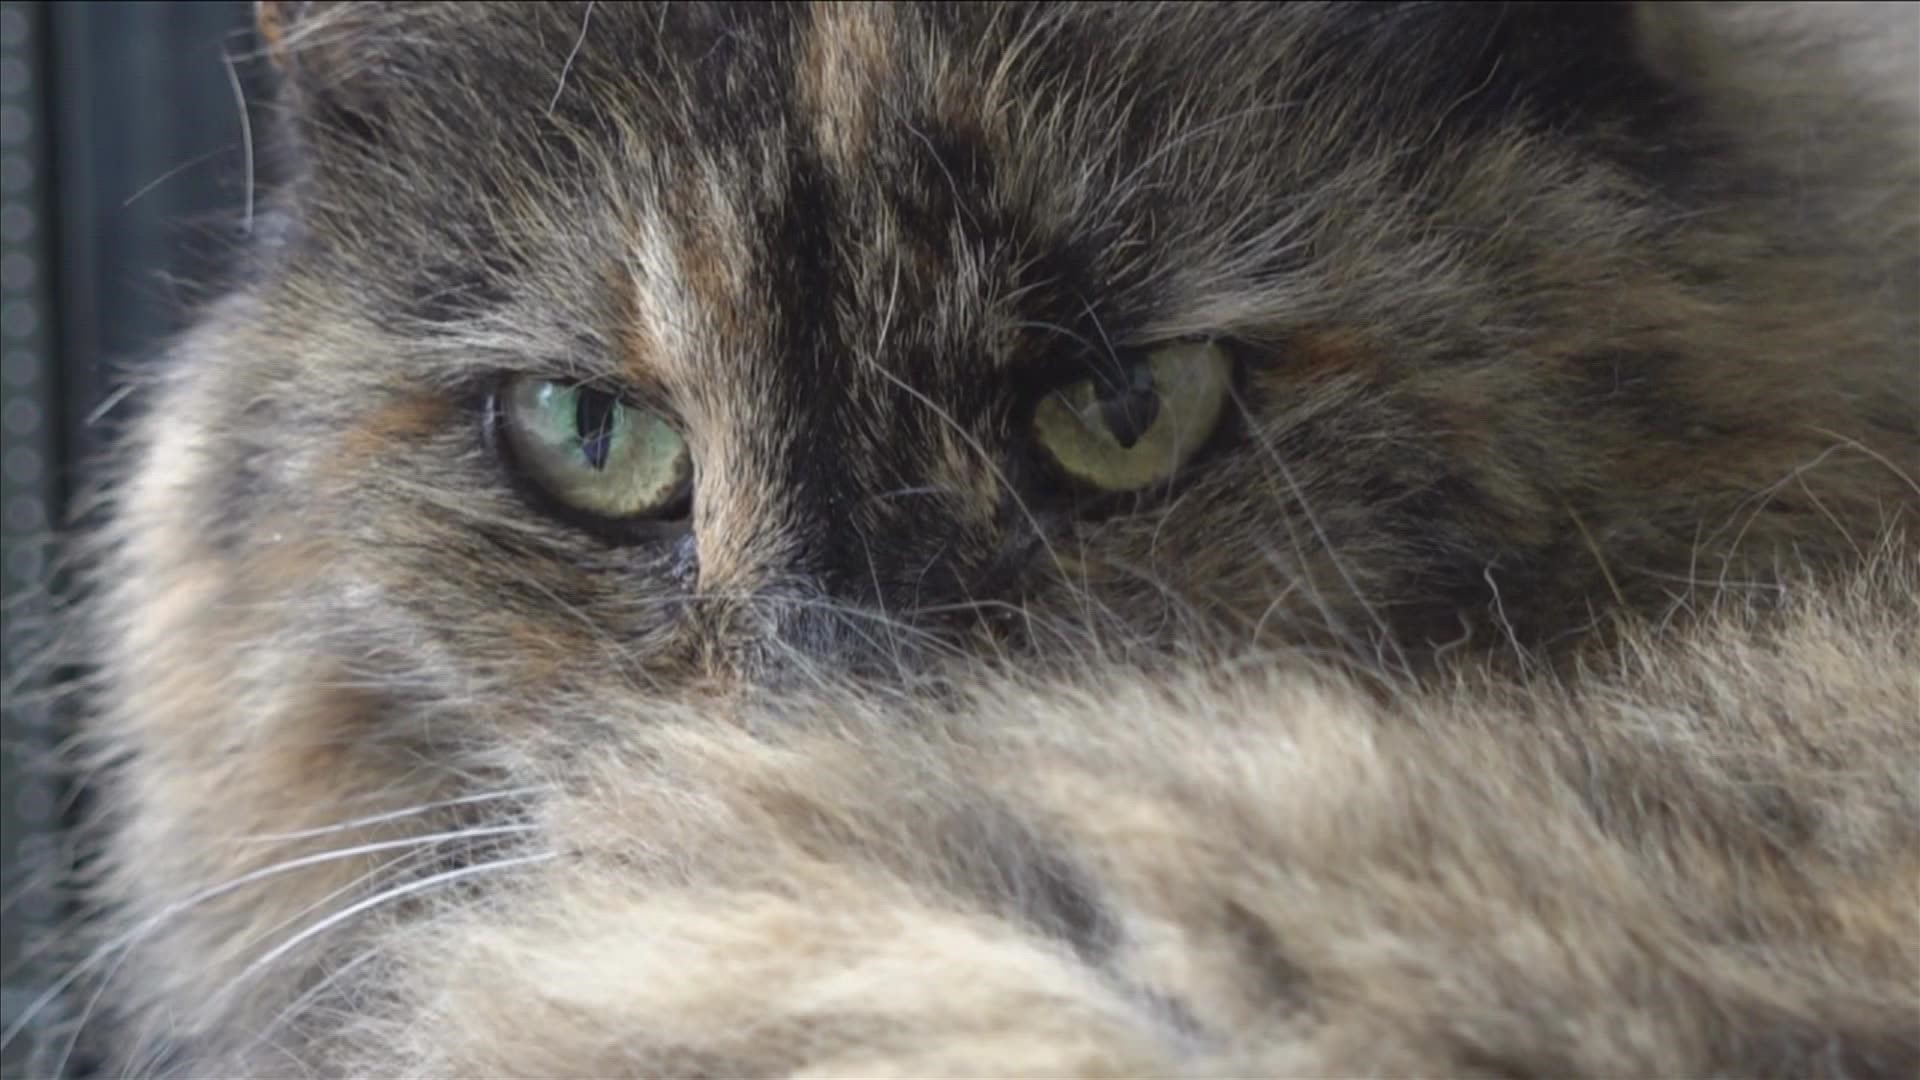 After 15 years with the shelter, Collierville Animal Services shares the story of the one cat who they say is not up for adoption - Cinnamon the therapy cat.